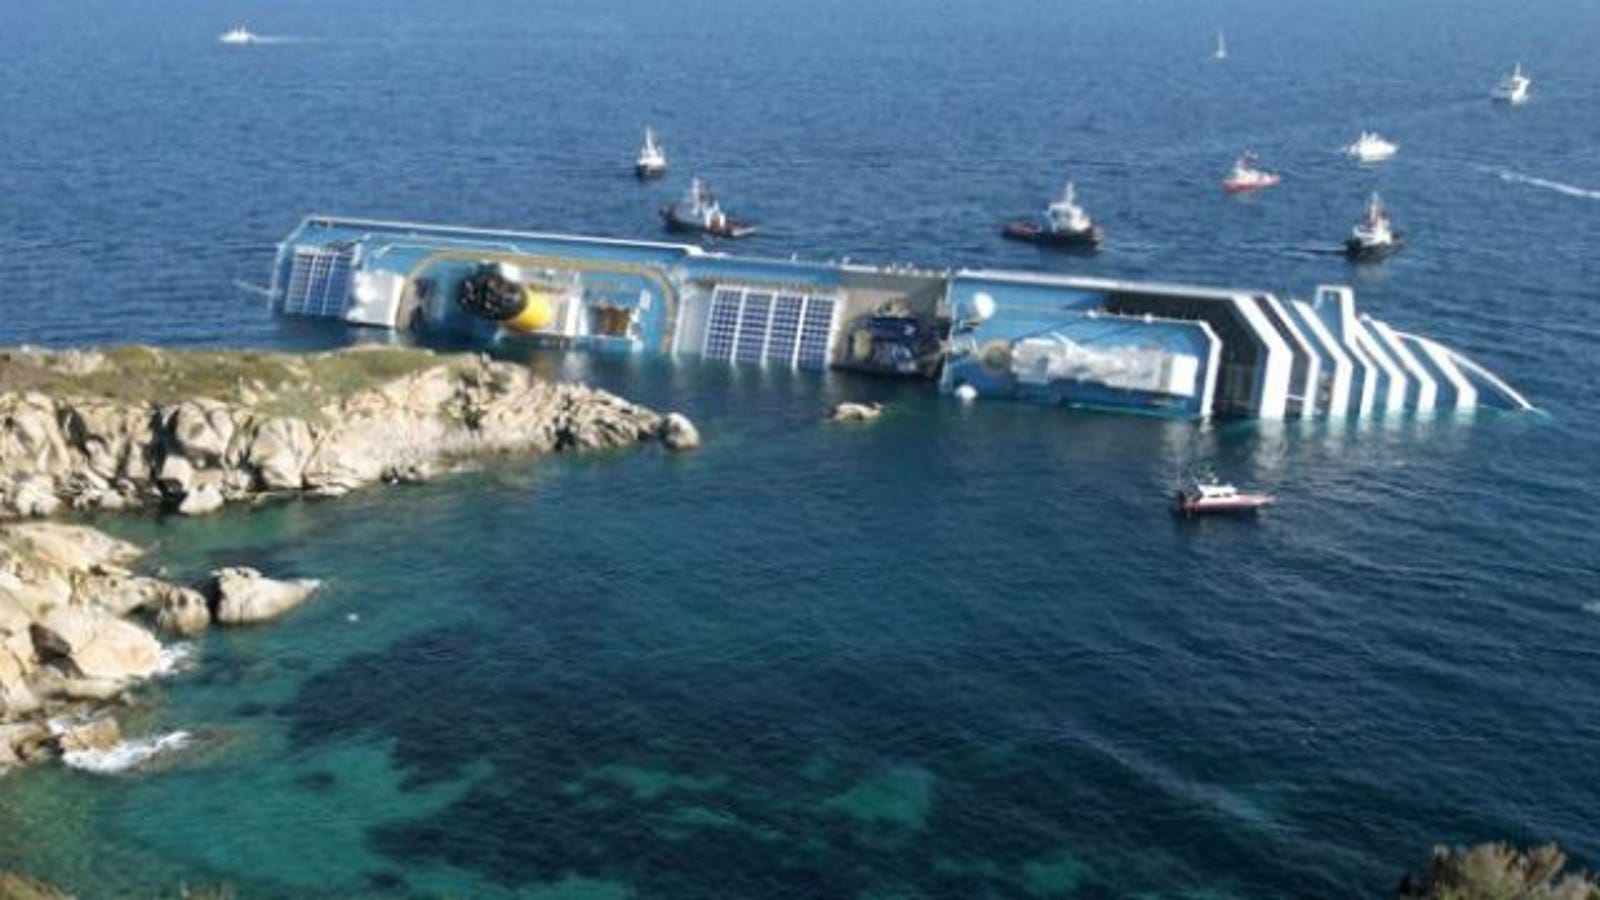 Owners Of Capsized Italian Cruise Ship Want To Save It With